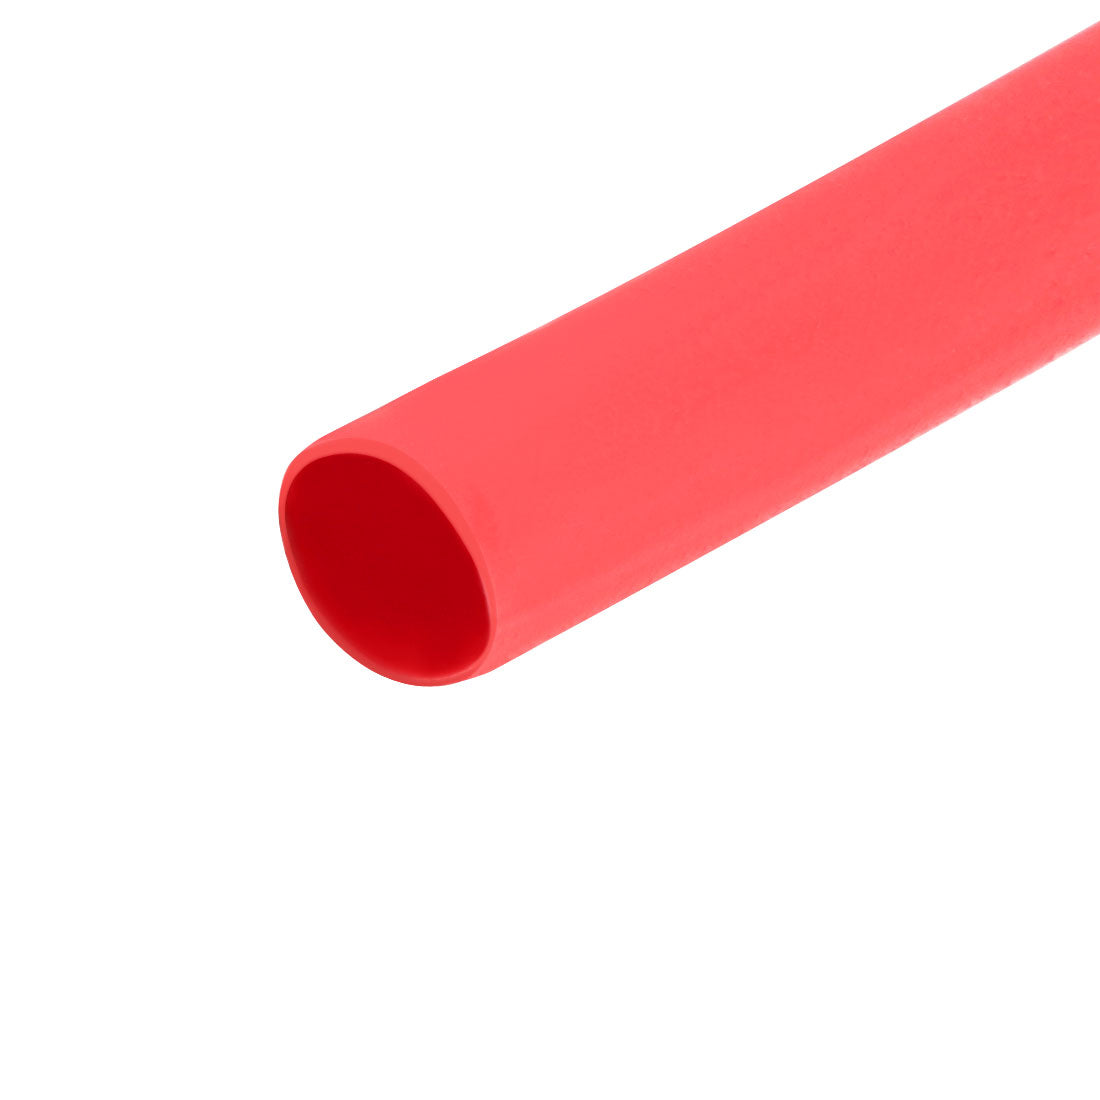 uxcell Uxcell Heat Shrink Tube 2:1 Electrical Insulation Tube Wire Cable Tubing Sleeving Wrap Red 2.5mm Diameter 1m Long